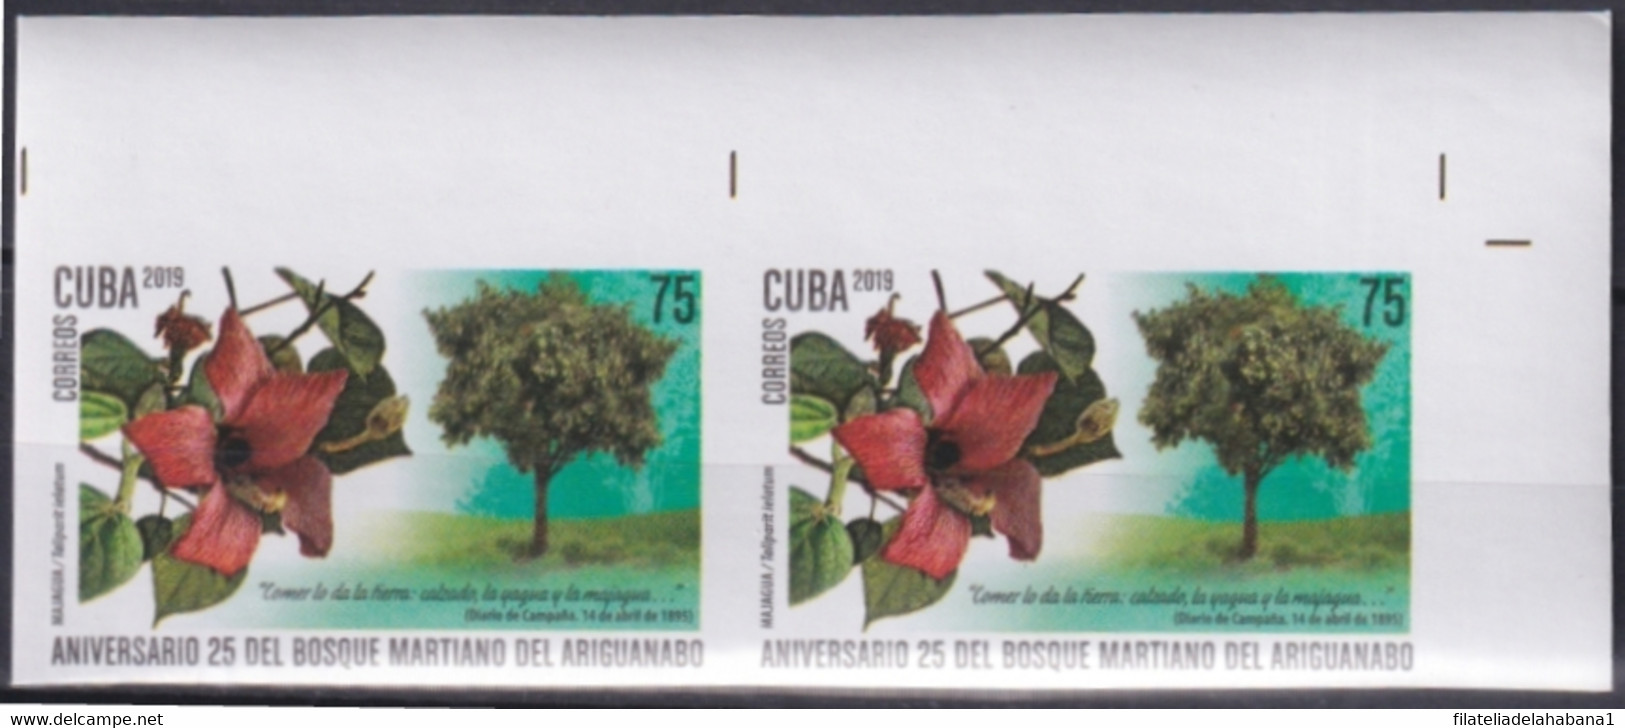 2019.203 CUBA MNH 2019 IMPERFORATED PROOF 75c MARTI TREE ARIGUANABO MAJAGUA. - Imperforates, Proofs & Errors